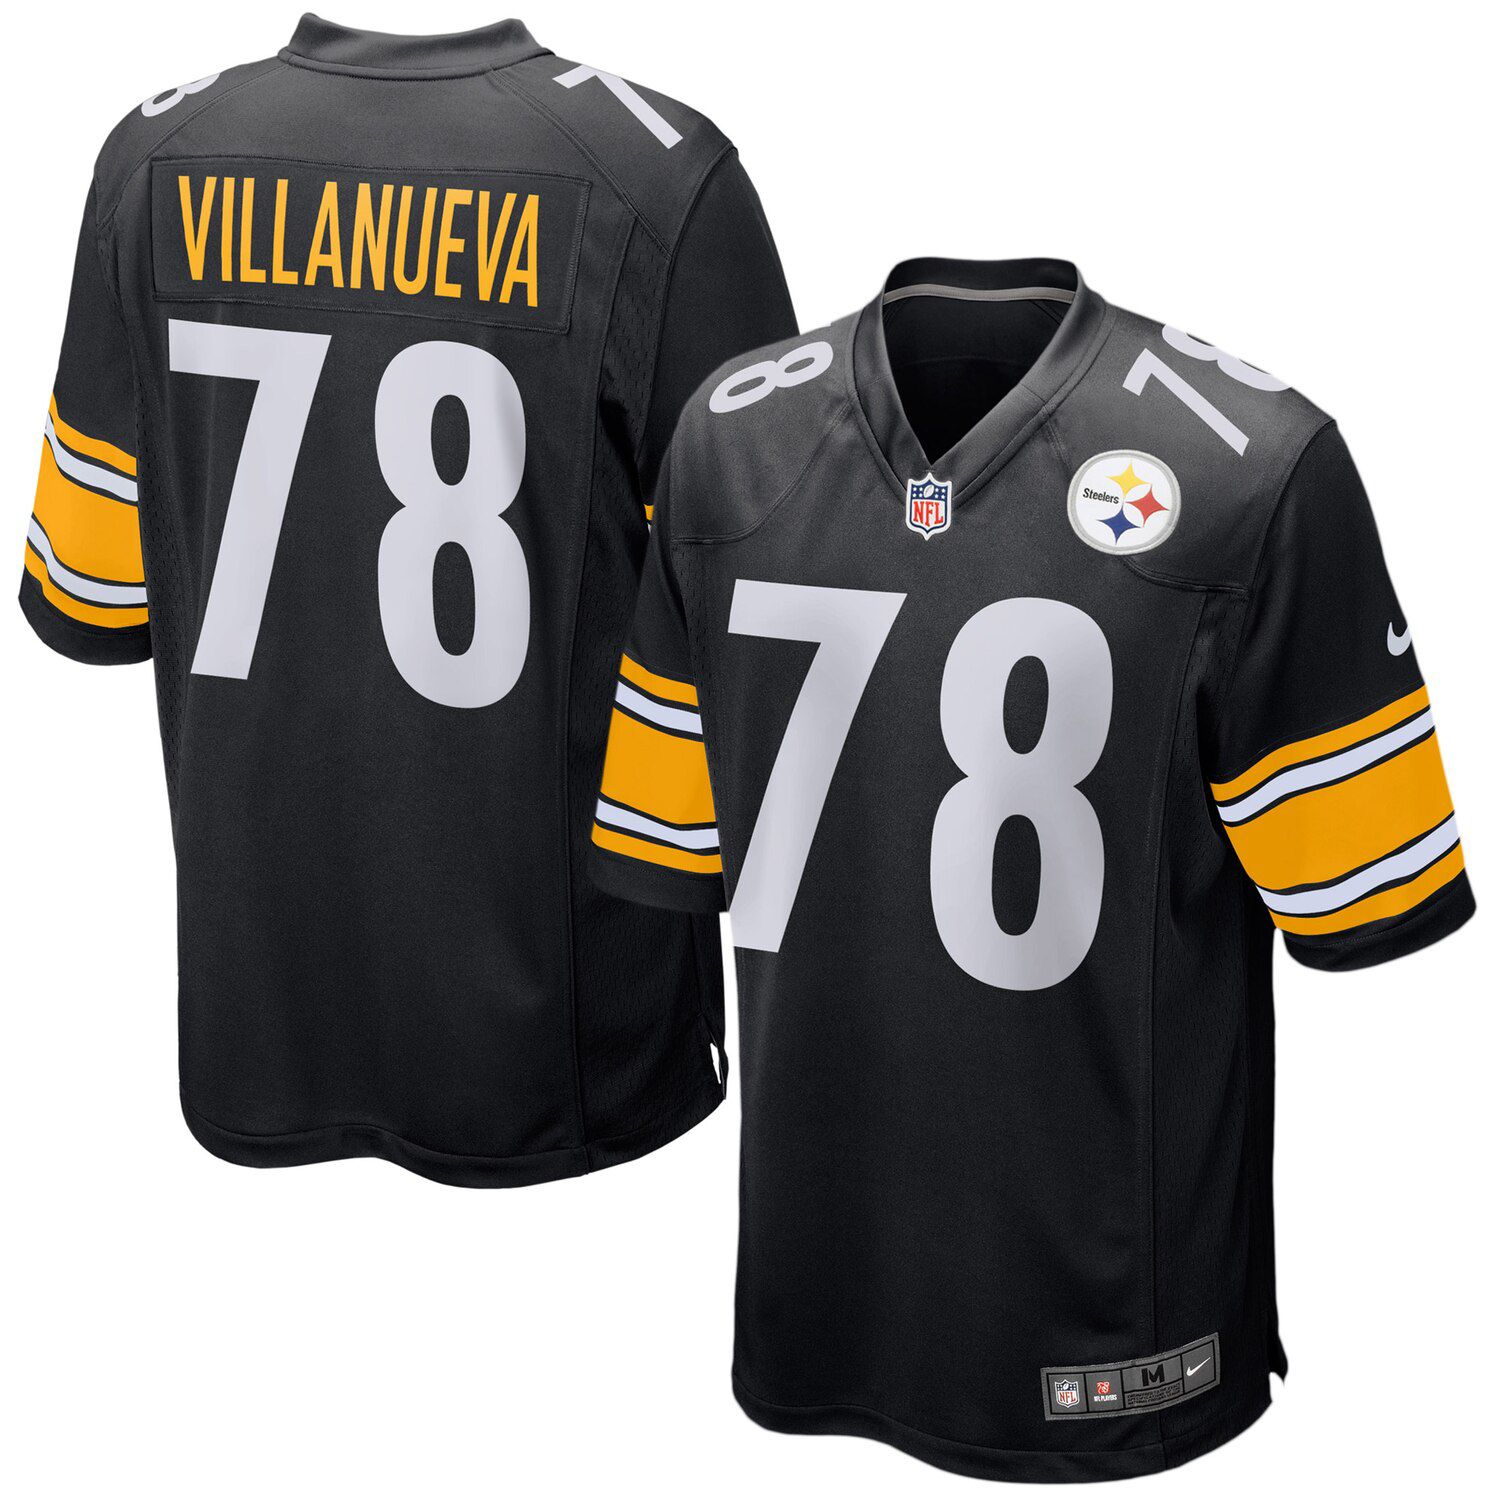 steelers jersey youth large